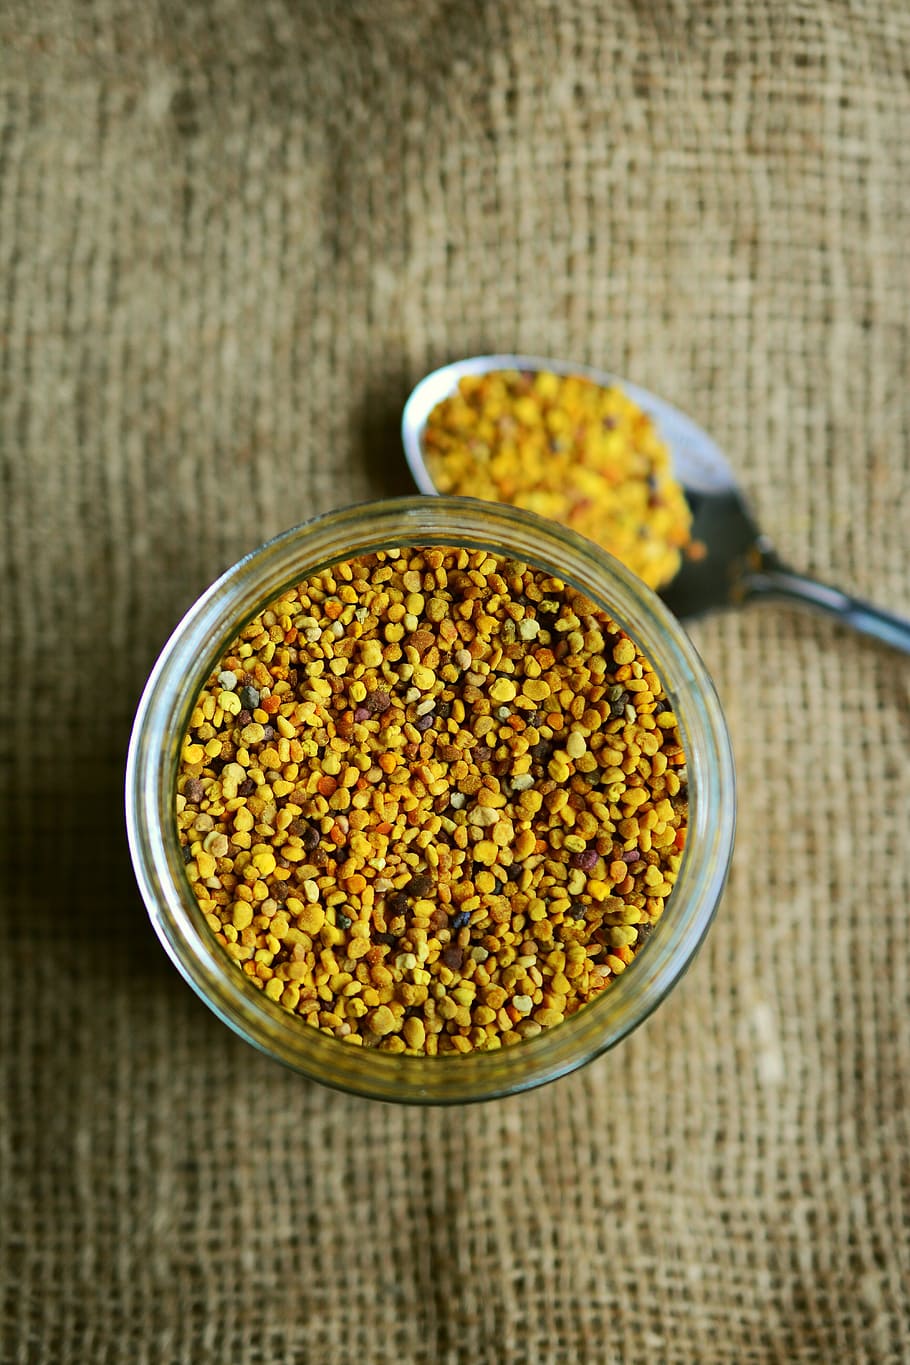 brown, substances, glass jar, bee pollen, pollen, bees product, nature, bless you, cure, healthy